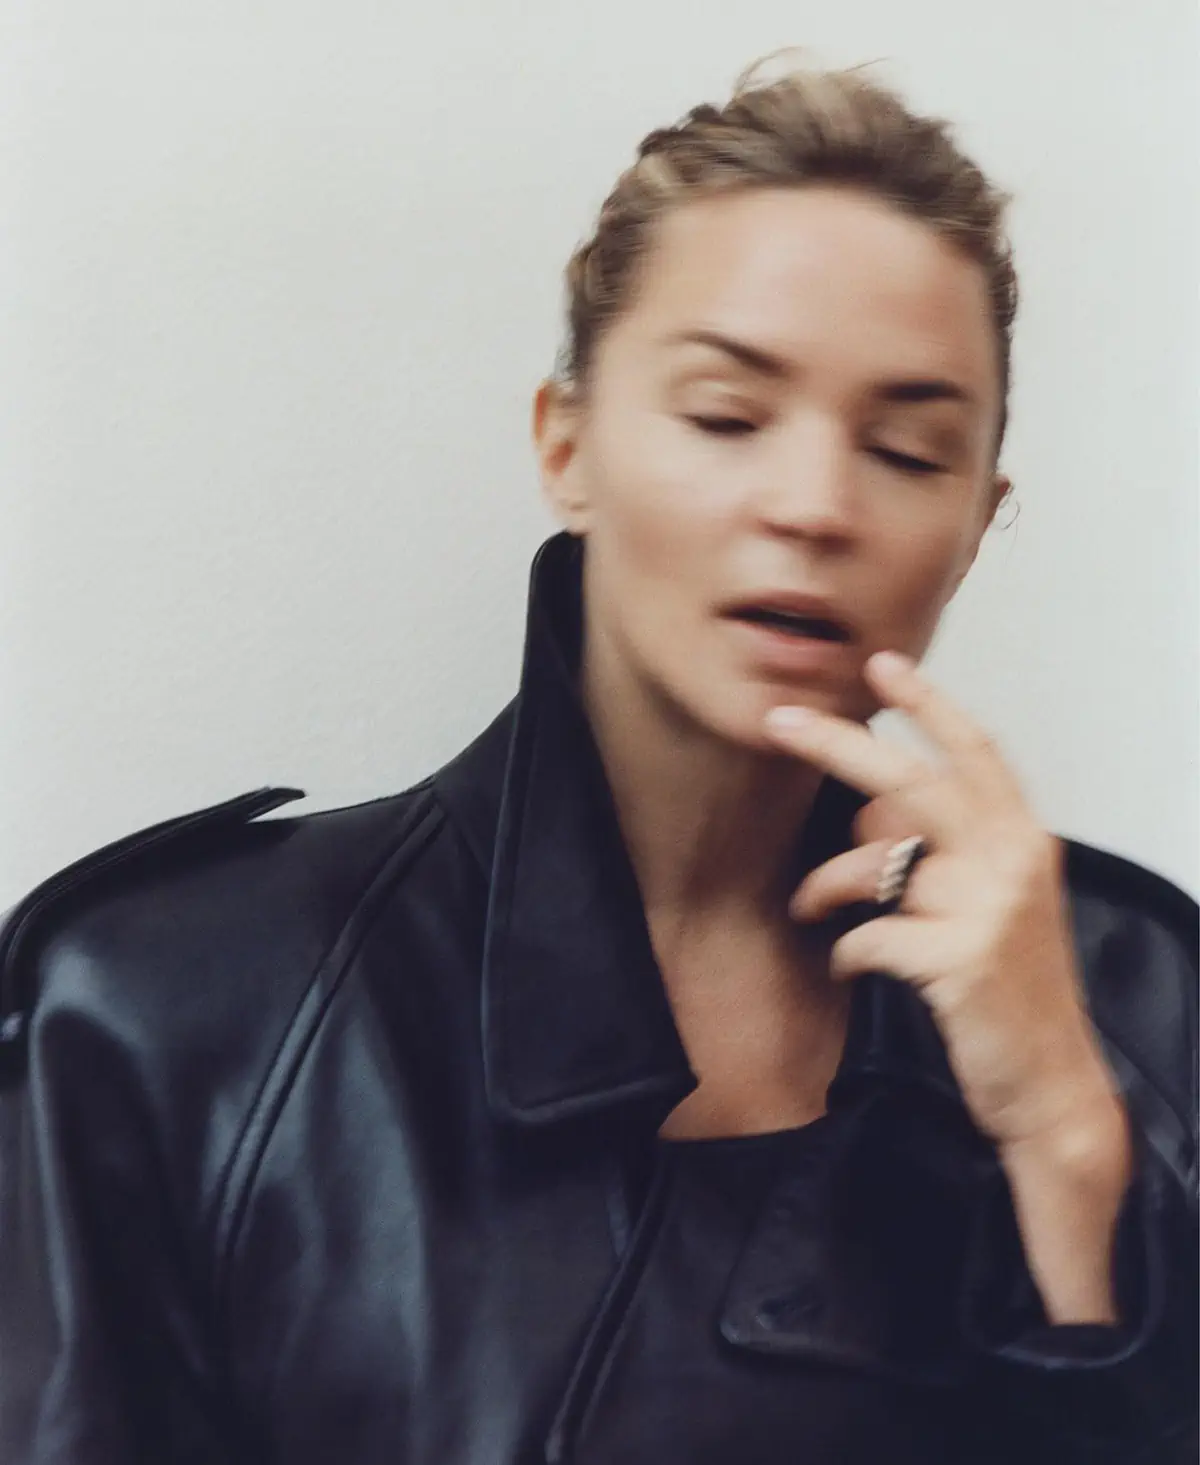 Virginie Efira covers M Le magazine du Monde February 4th, 2023 by Lukasz Pukowiec